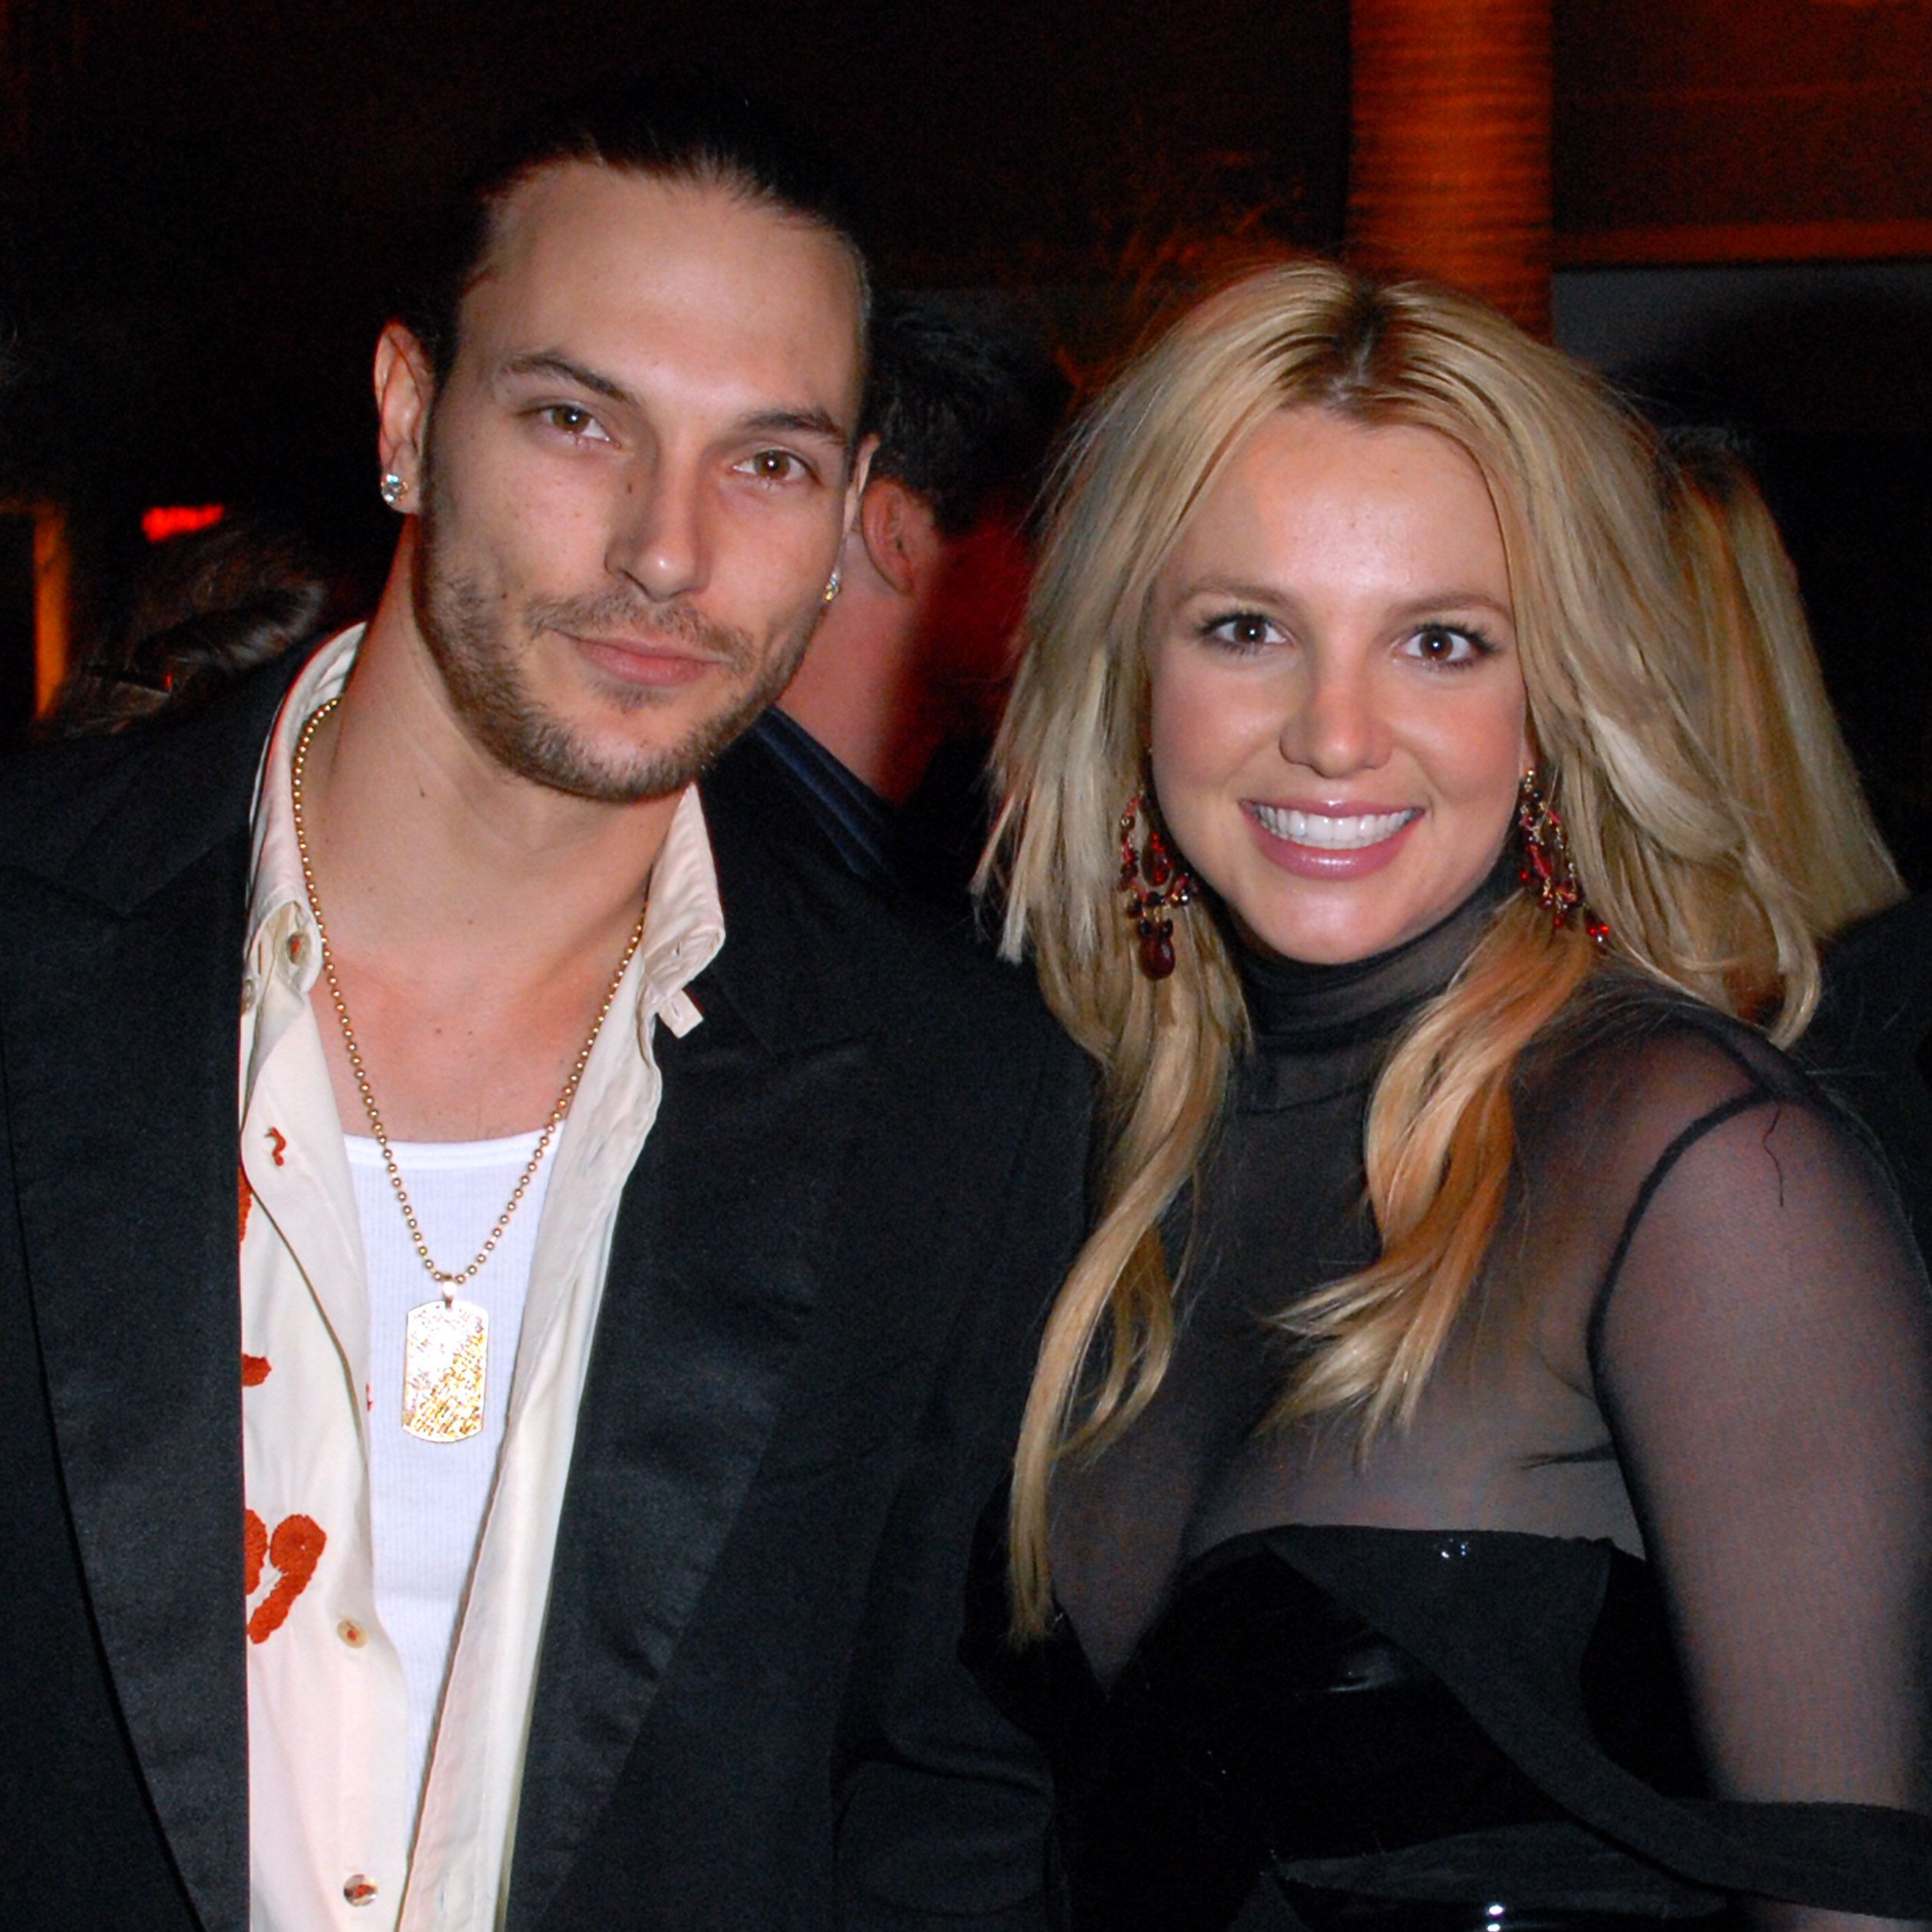 Kevin Federline's Lawyer Just Issued a Statement on His Behalf About Britney Spears' Pregnancy